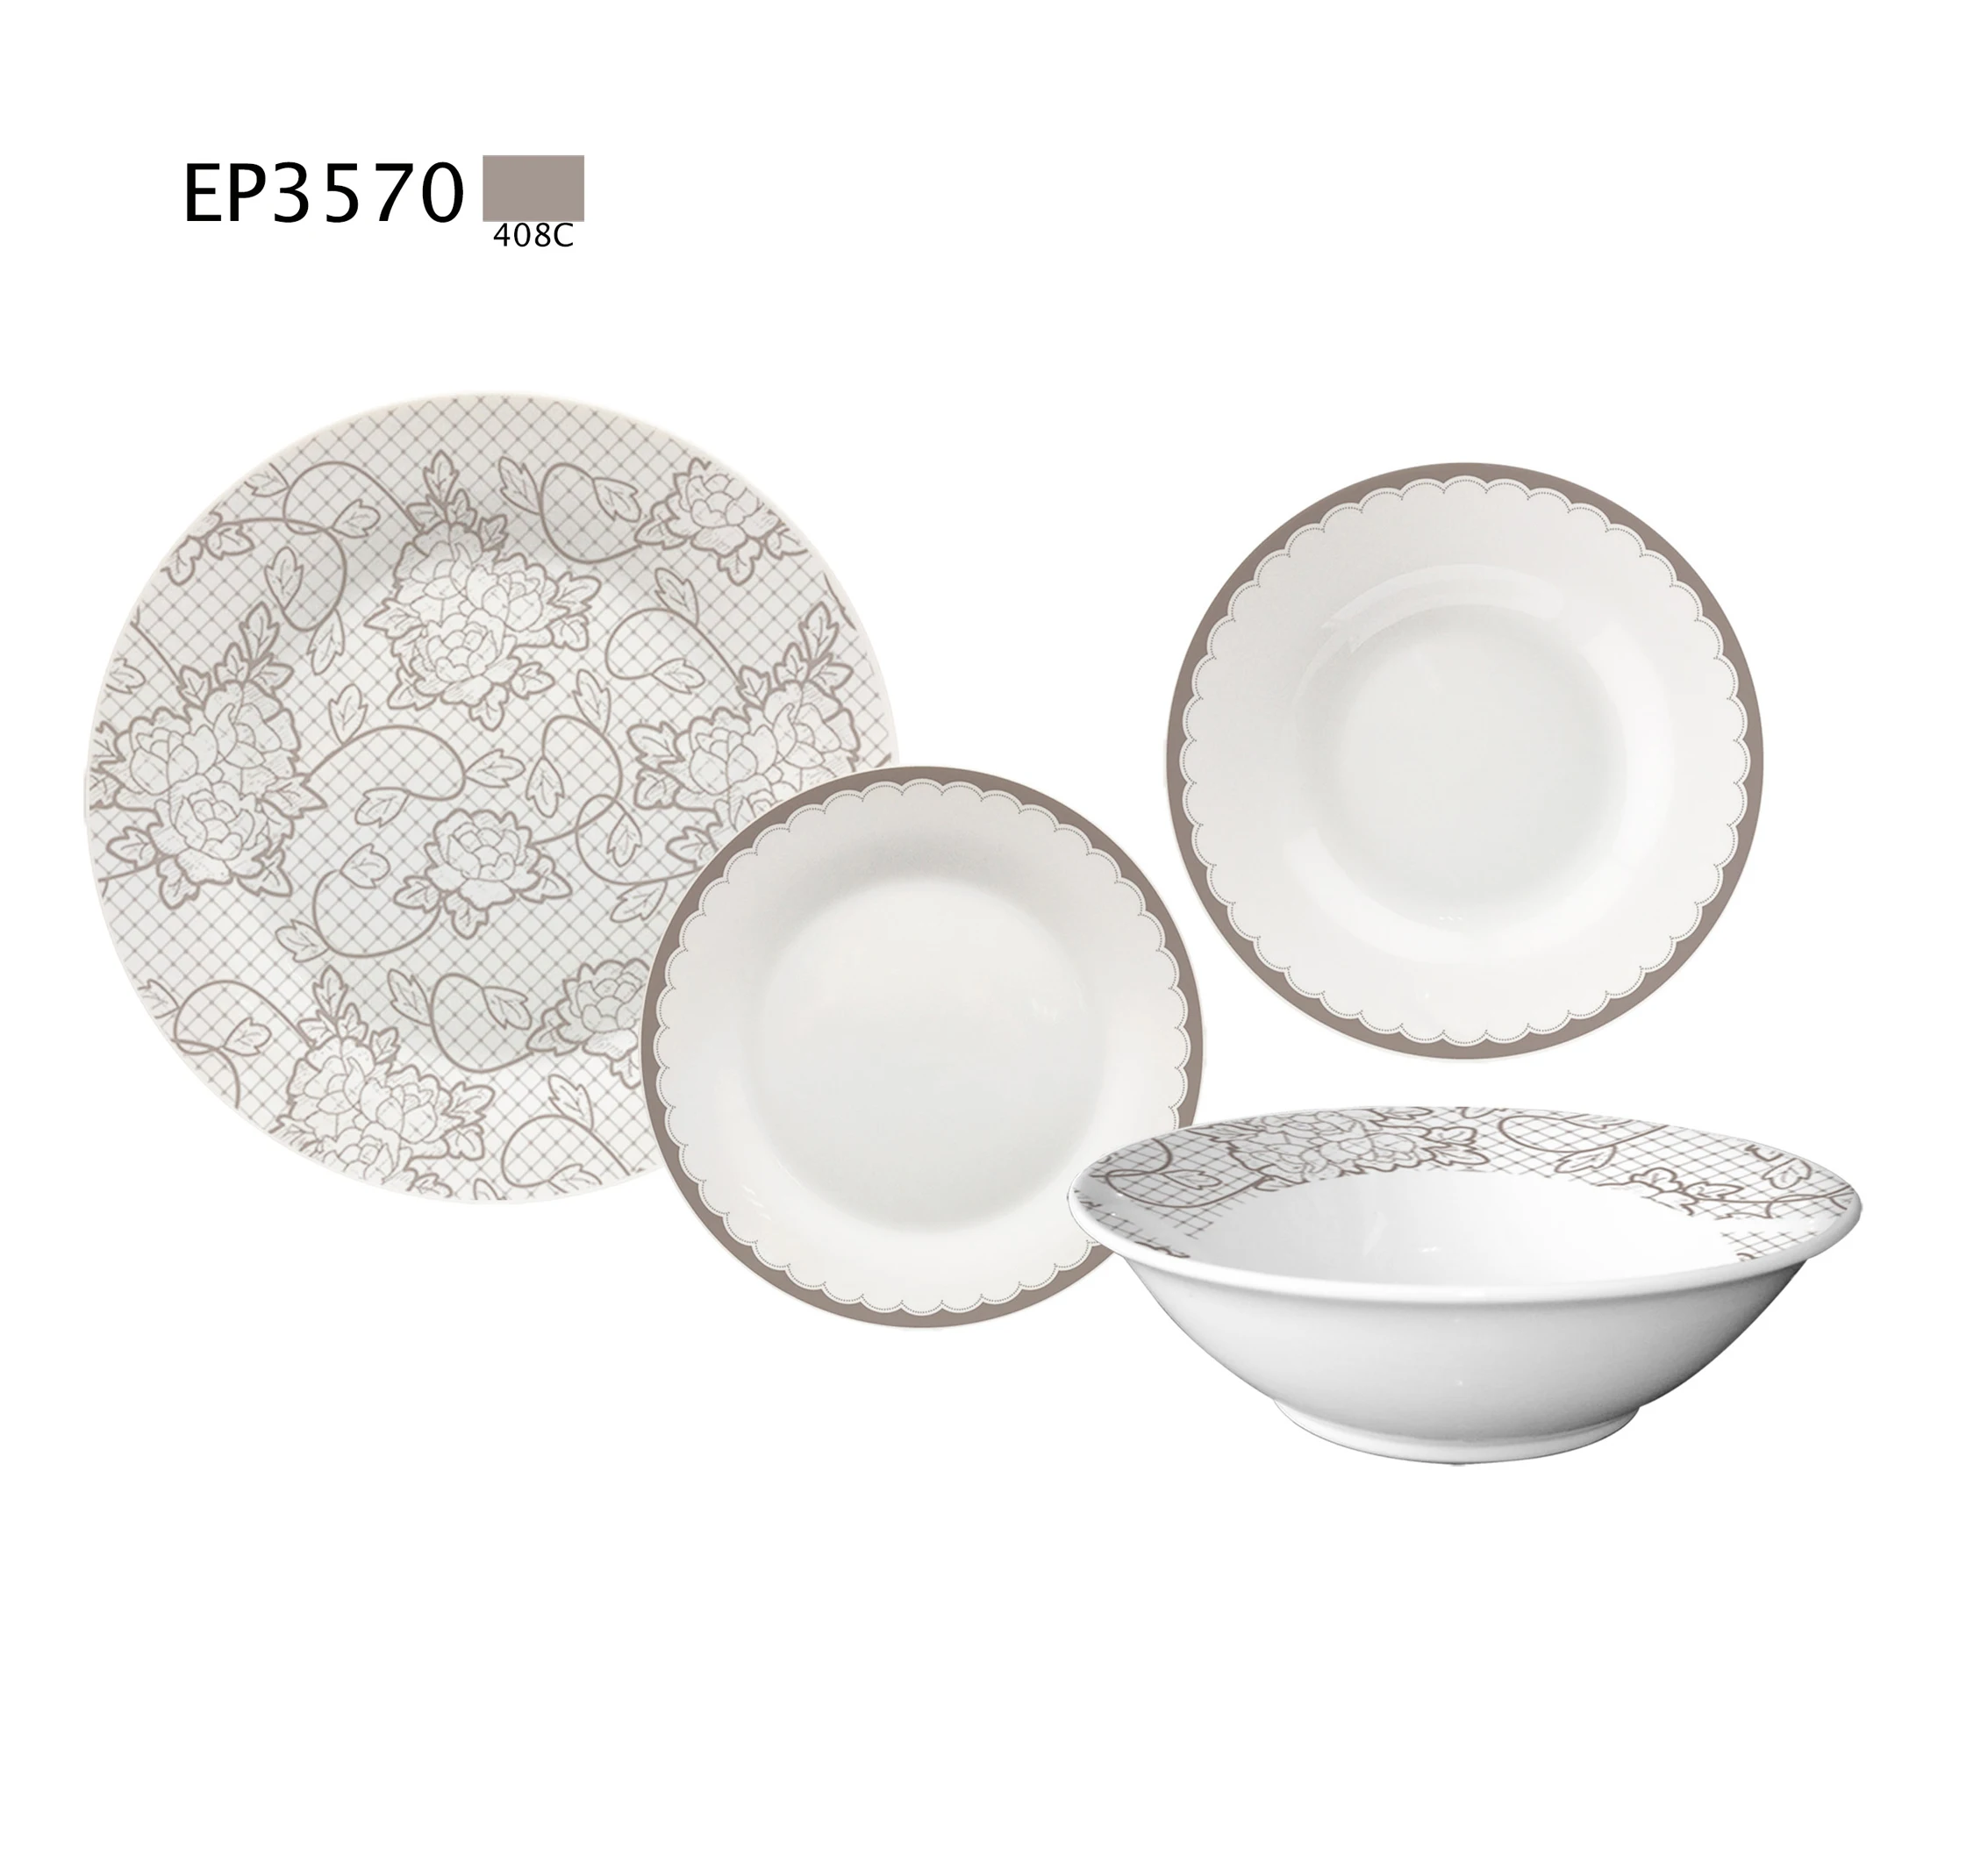 luxury plates and bowls